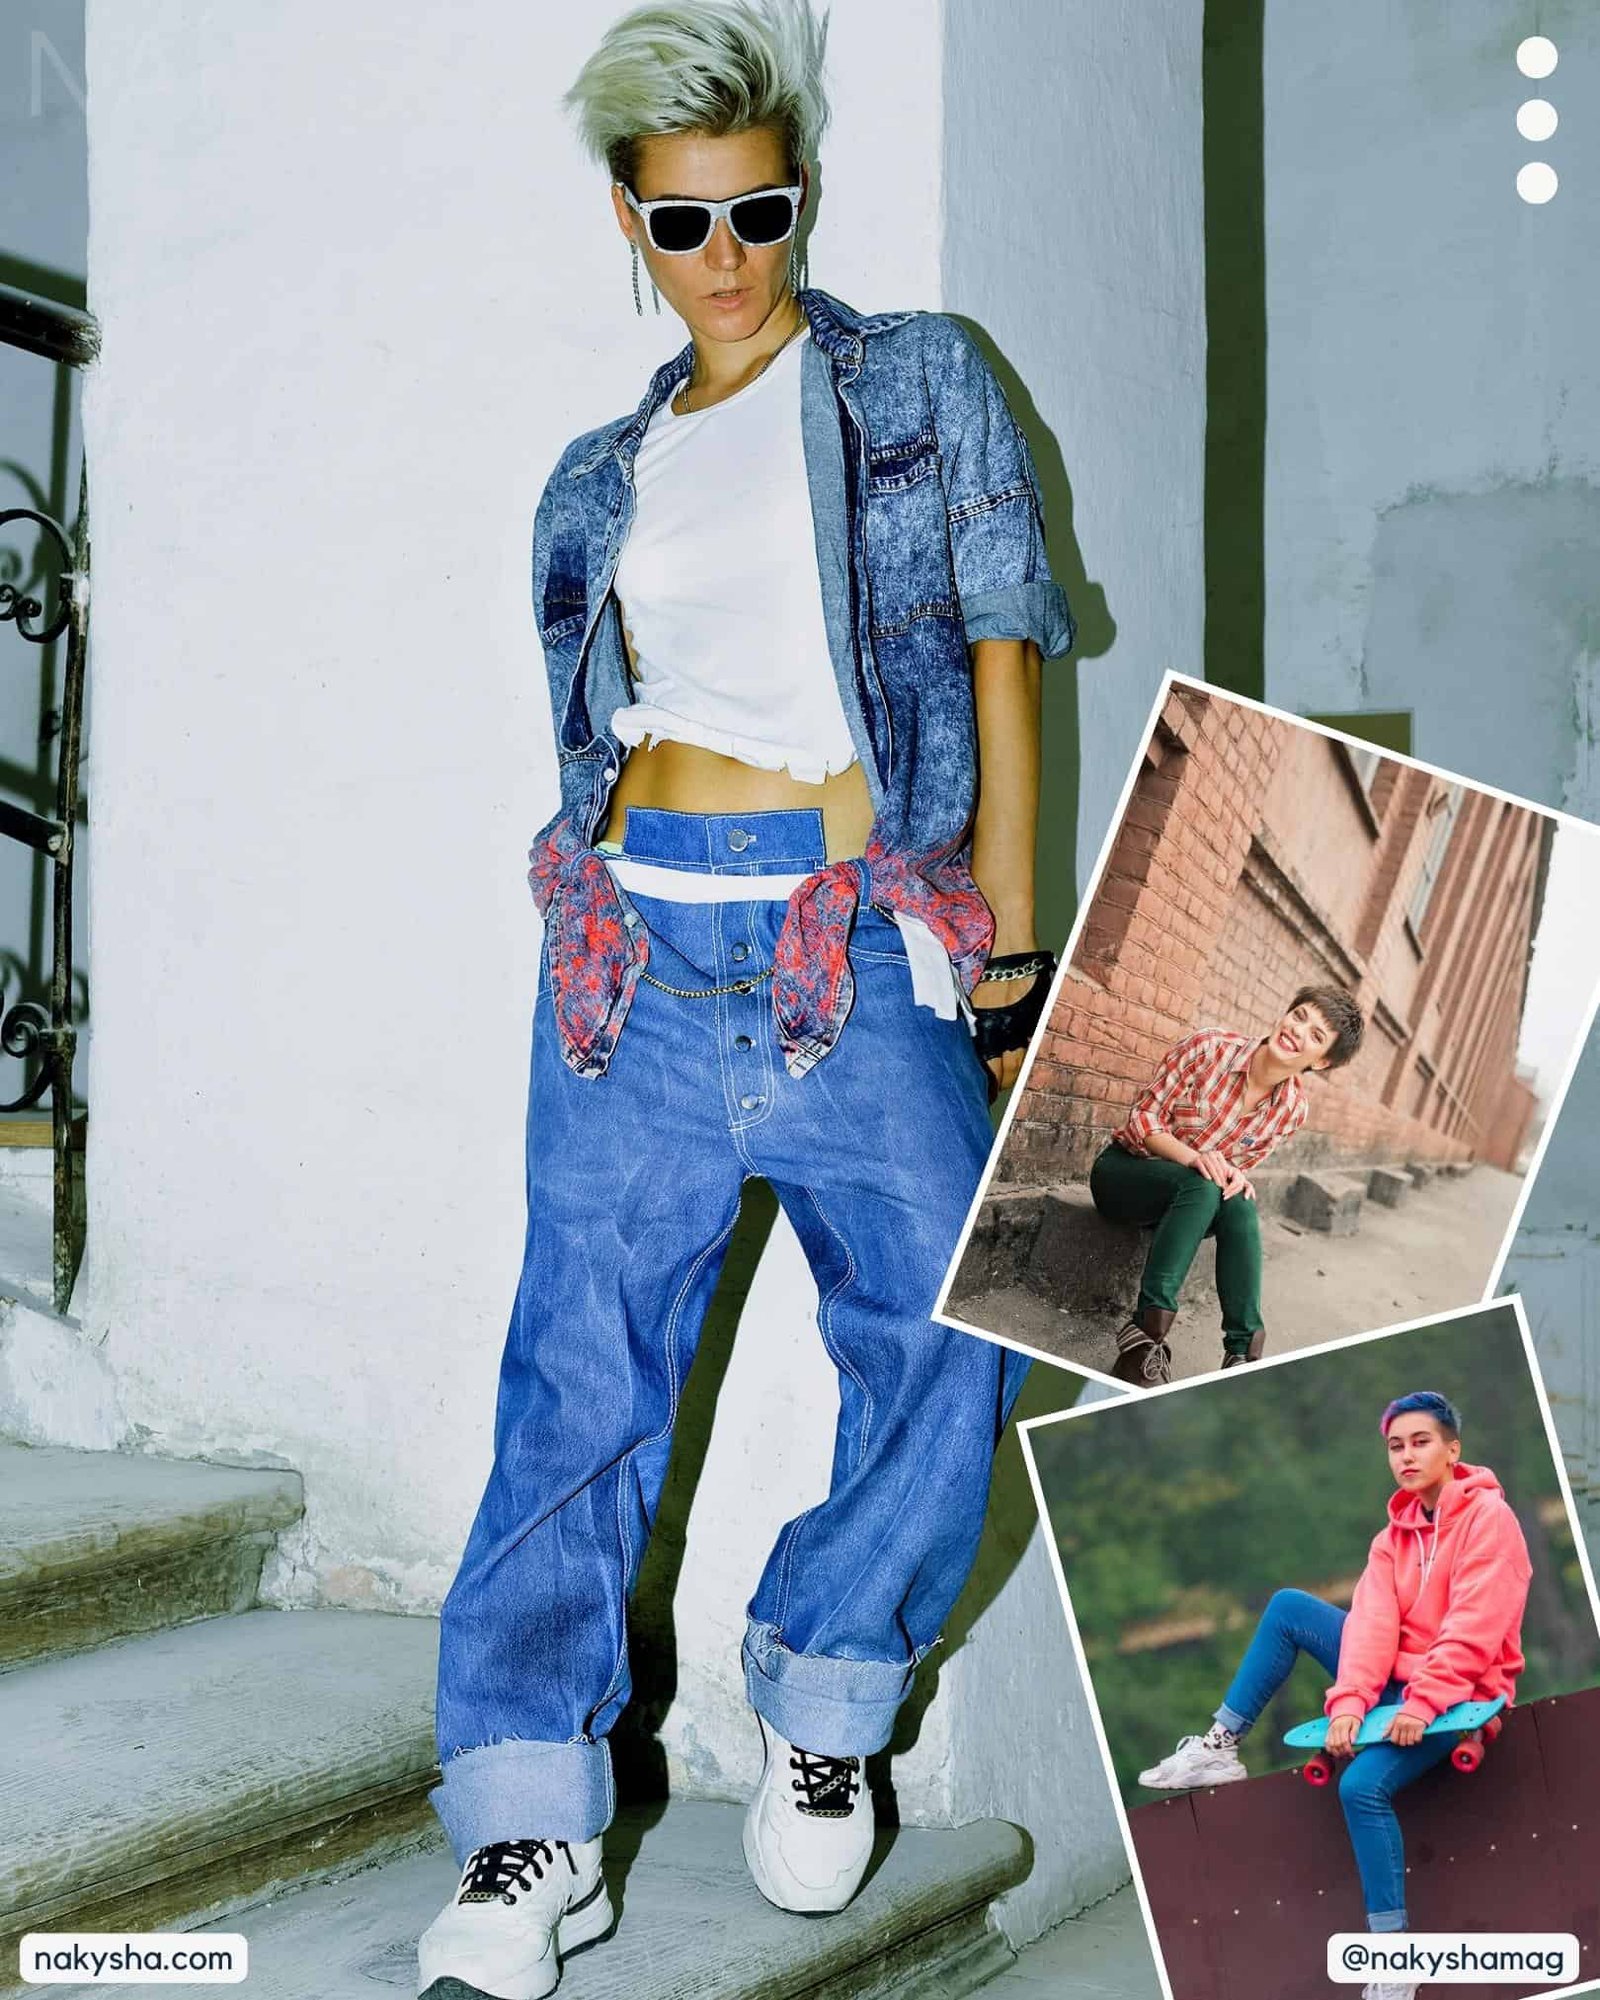 What is Tomboy Fashion?